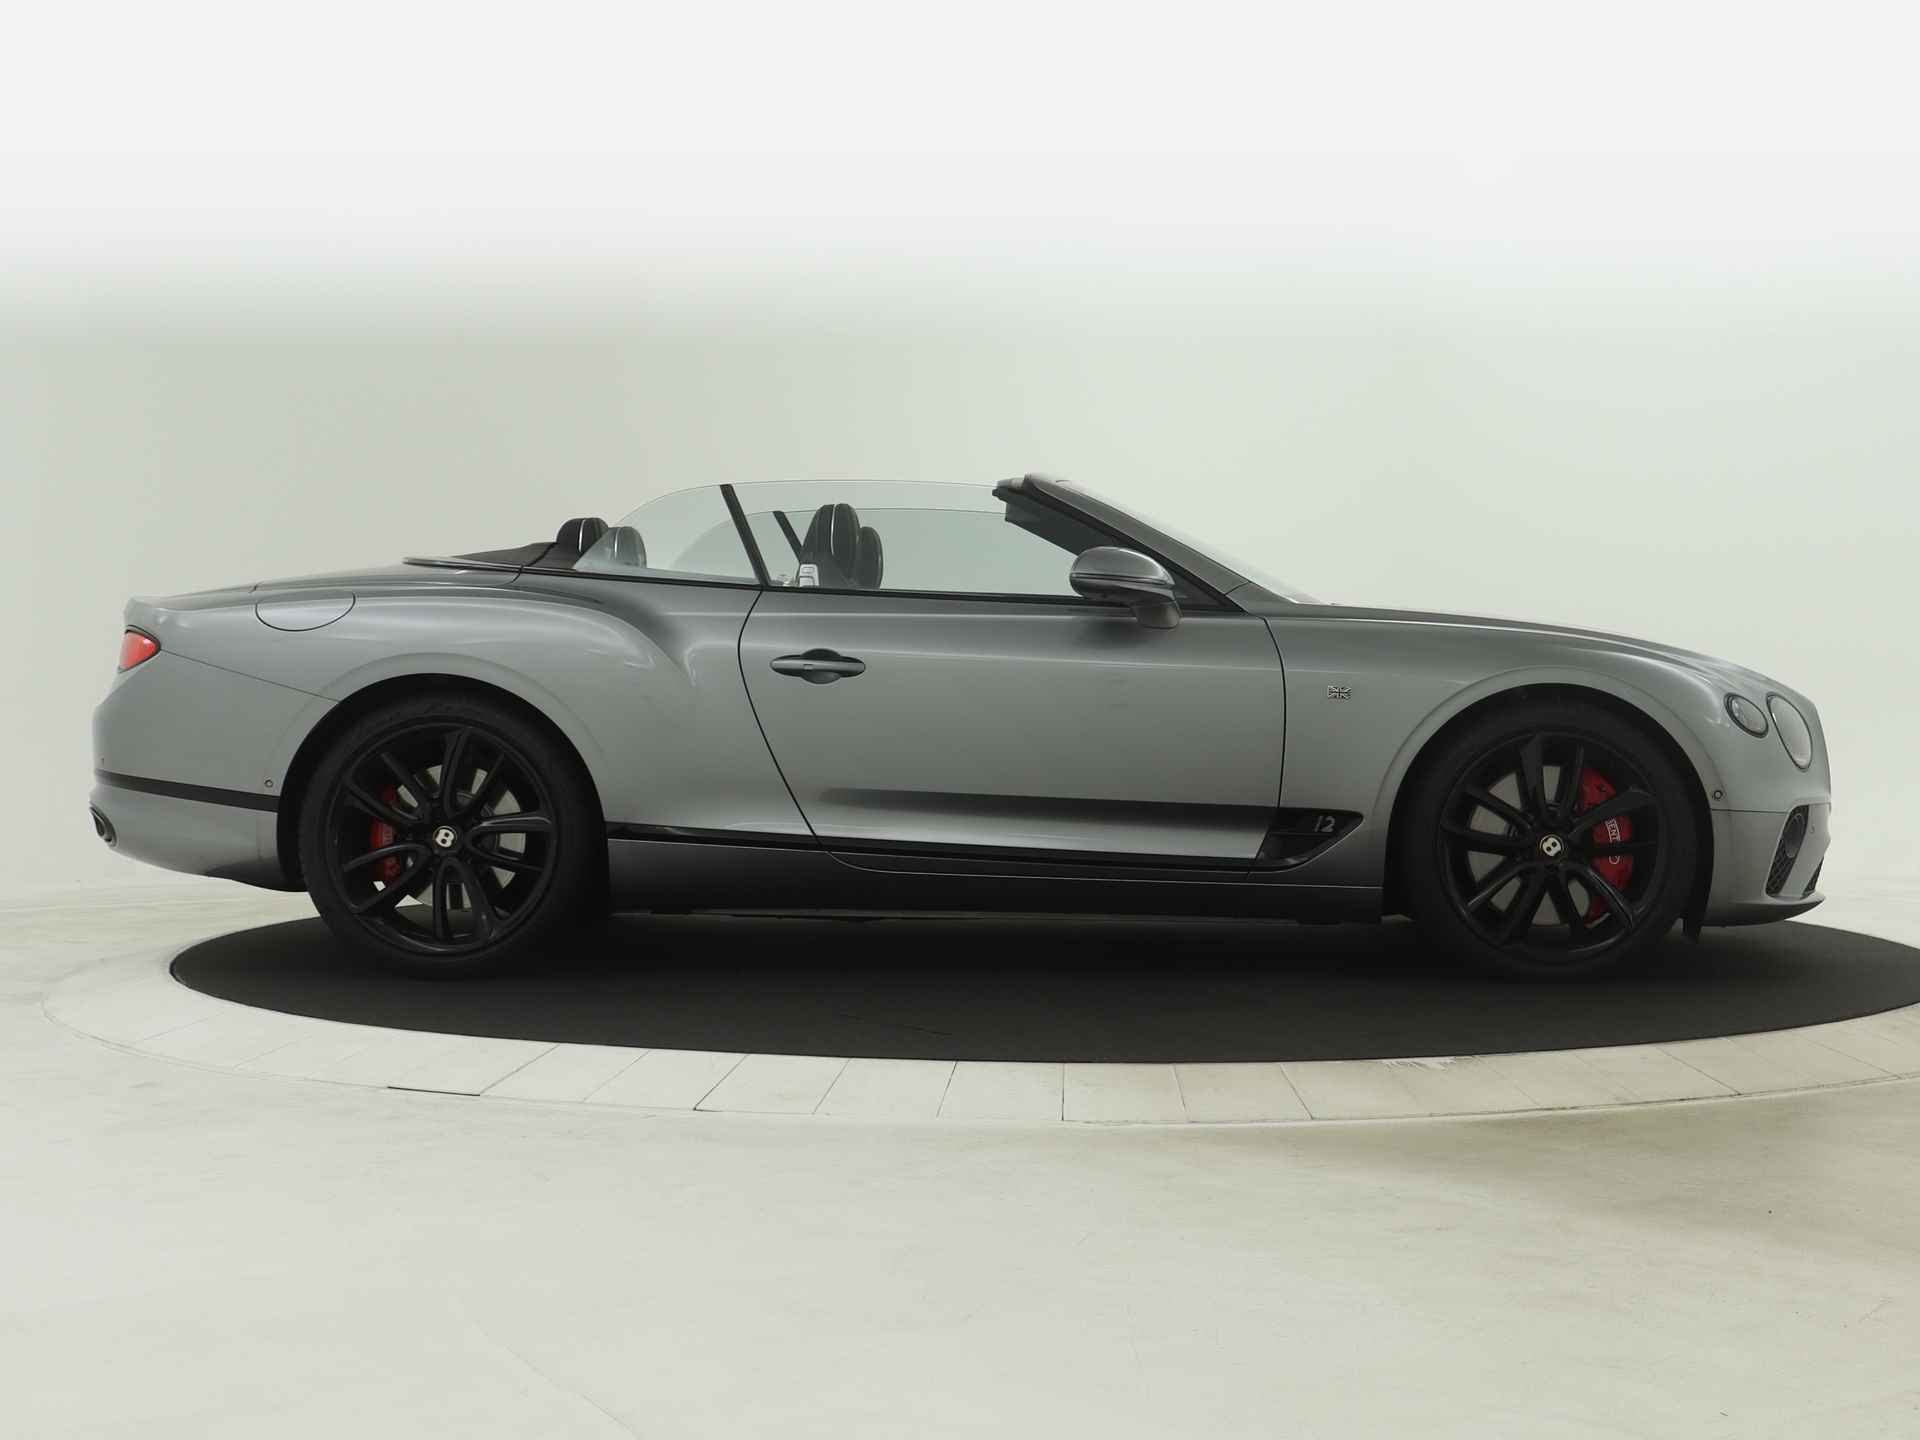 Bentley Continental GTC 6.0 W12 First Edition Mulliner - Bang & Olufsen - Black package - Massage seats - 12/46